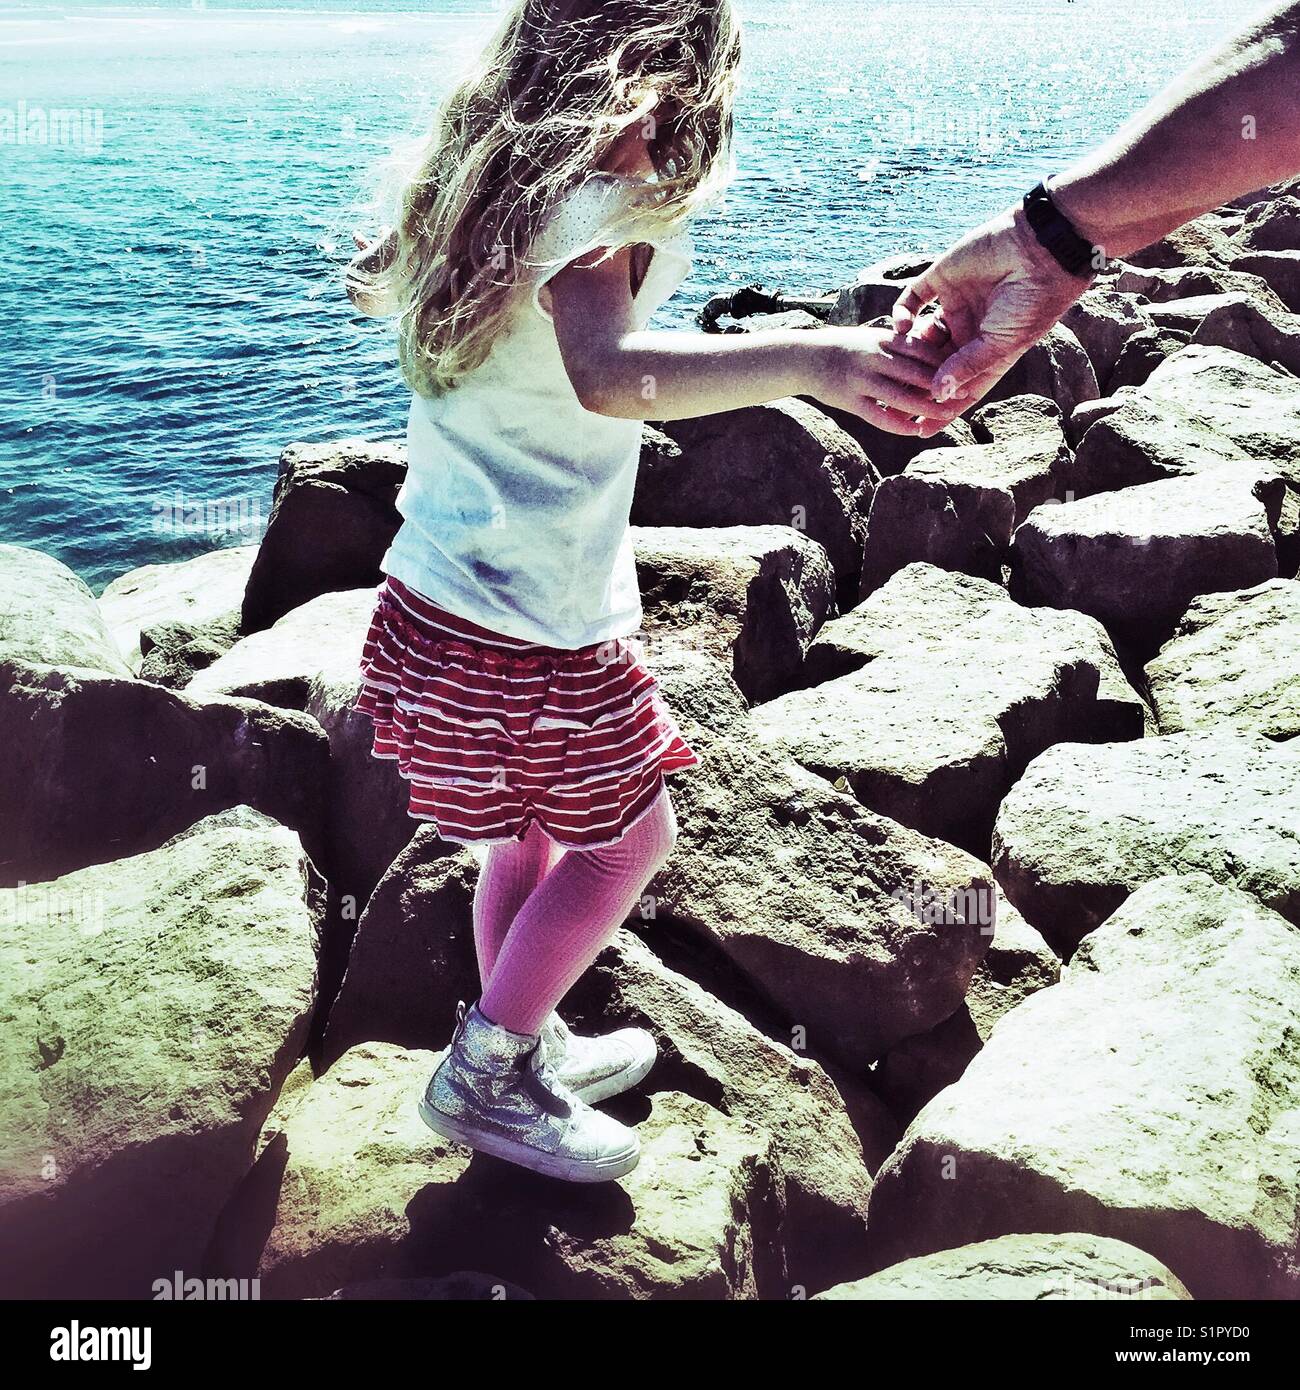 Young girl holding hands with adult walks on rocks by water edge. Huskisson, Jervis Bay, New South Wales, Australia Stock Photo